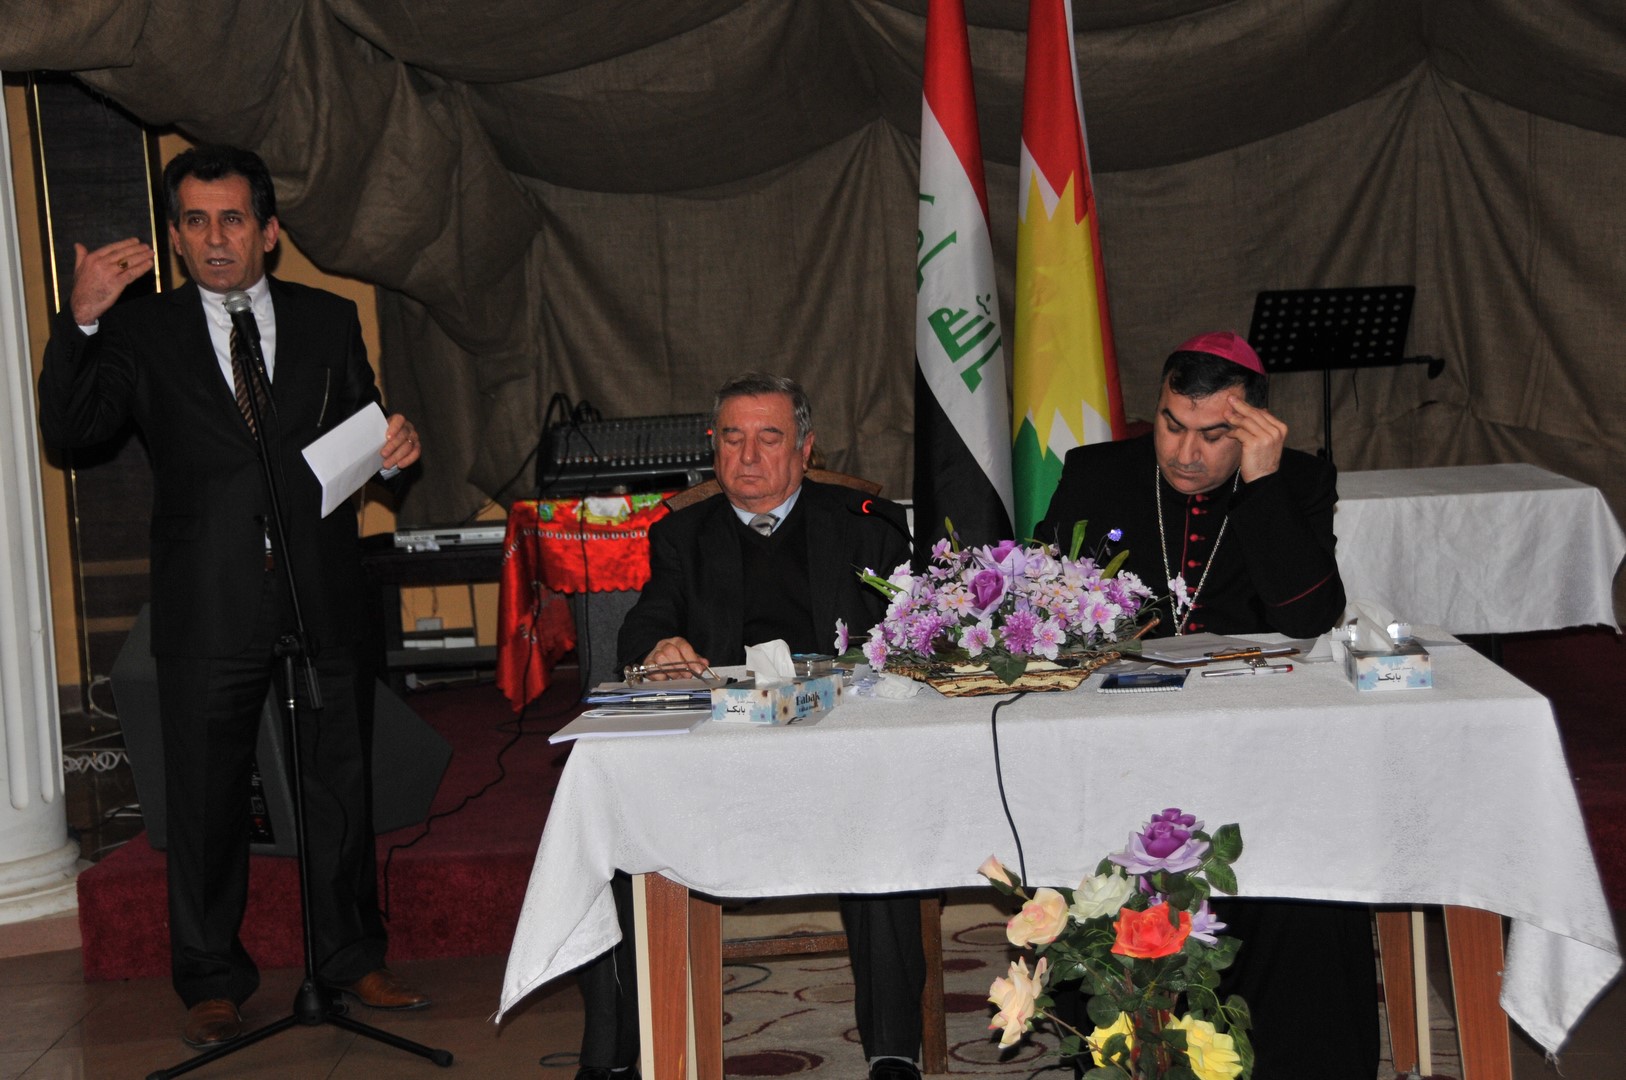 Bishop Bashar’s meeting with Ankawa institutions